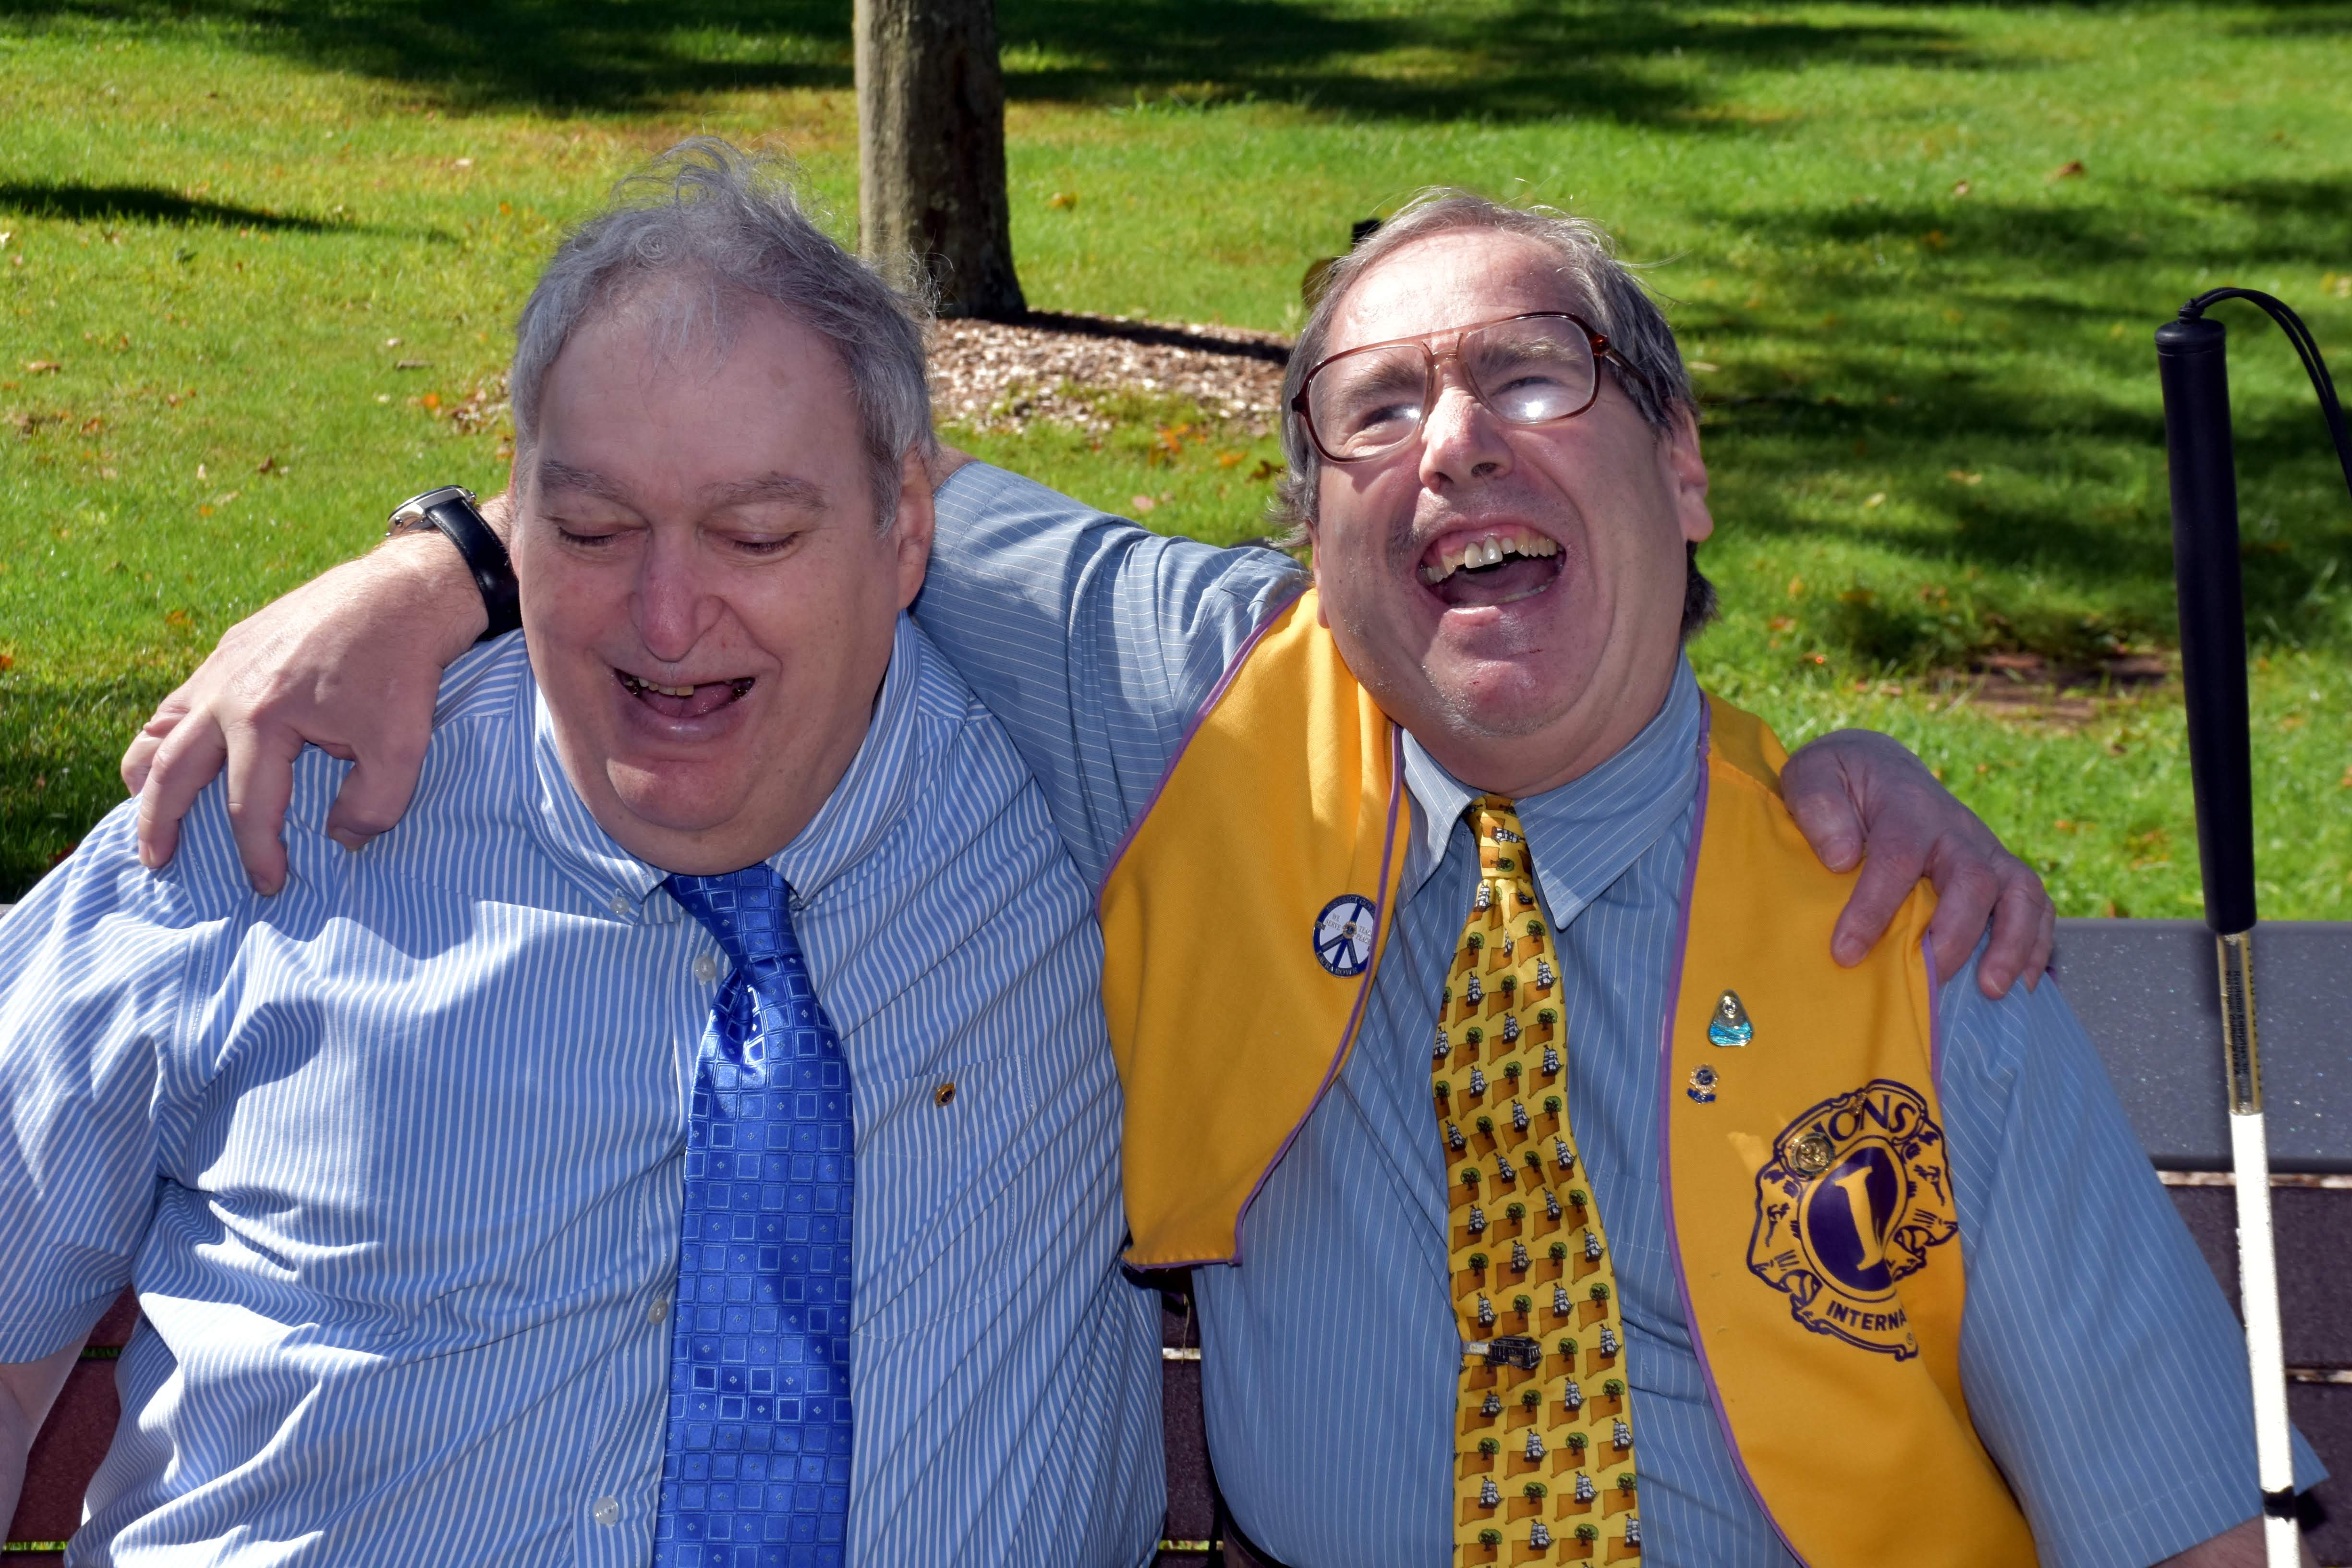 Zone Chairperson Lion Howard Geltman (left) enjoying some laughter with Lion Marty Knight on the newly-dedicated bench in honor of Knight’s 45 years of service.